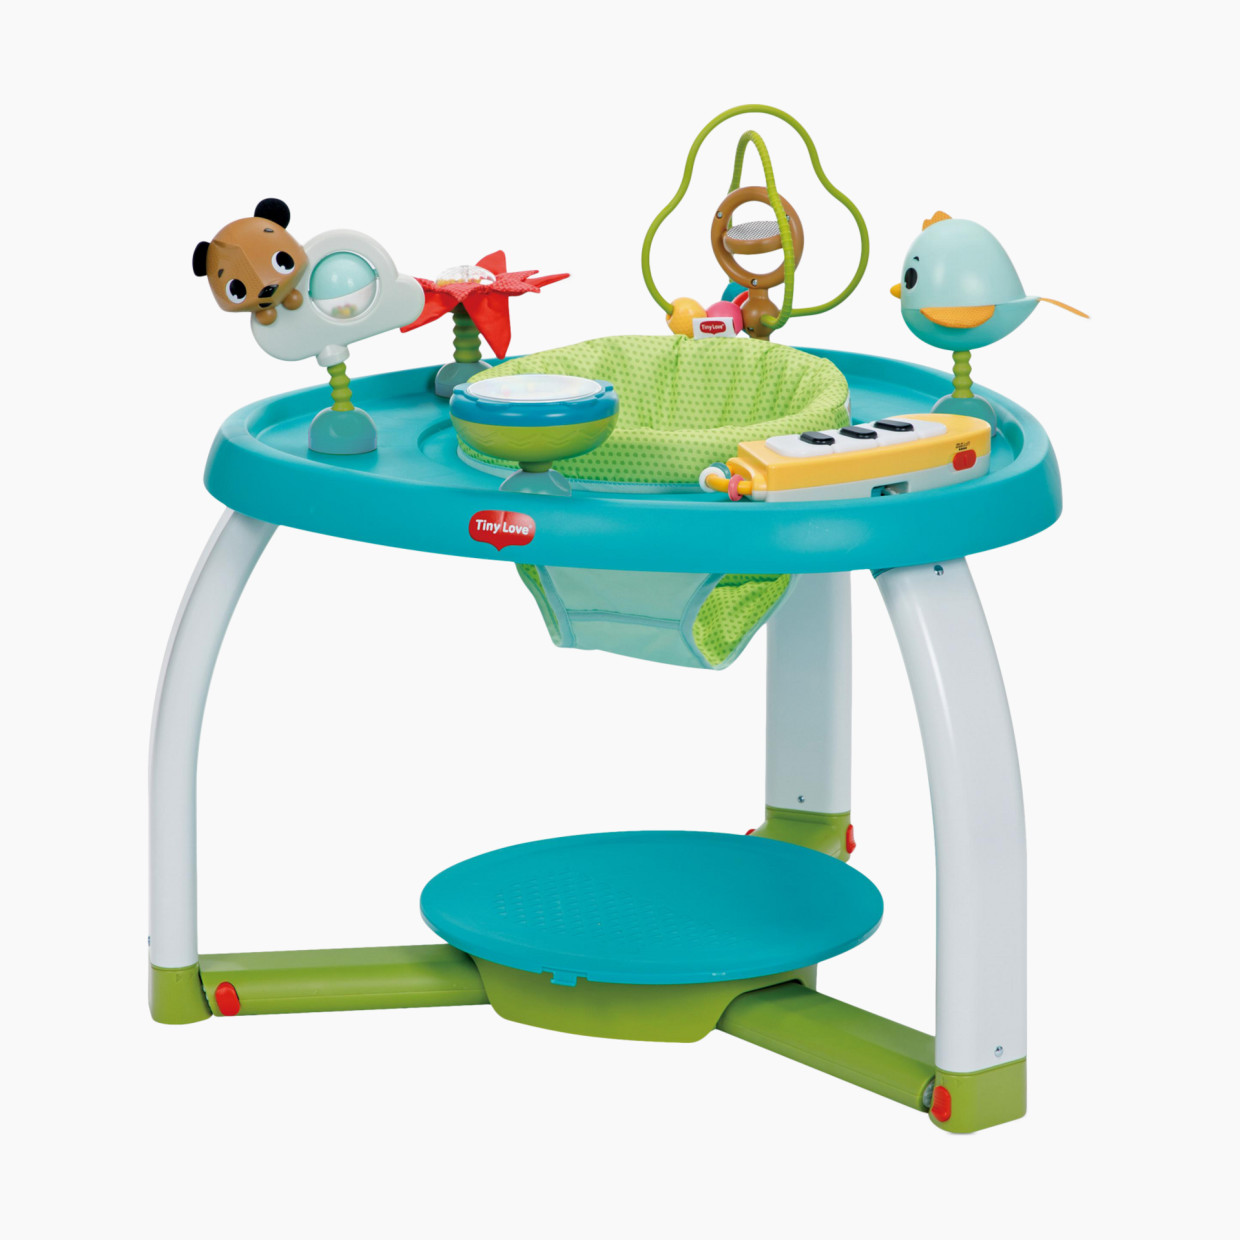 Tiny Love 5-in-1 Stationary Activity Center - Meadow Days.